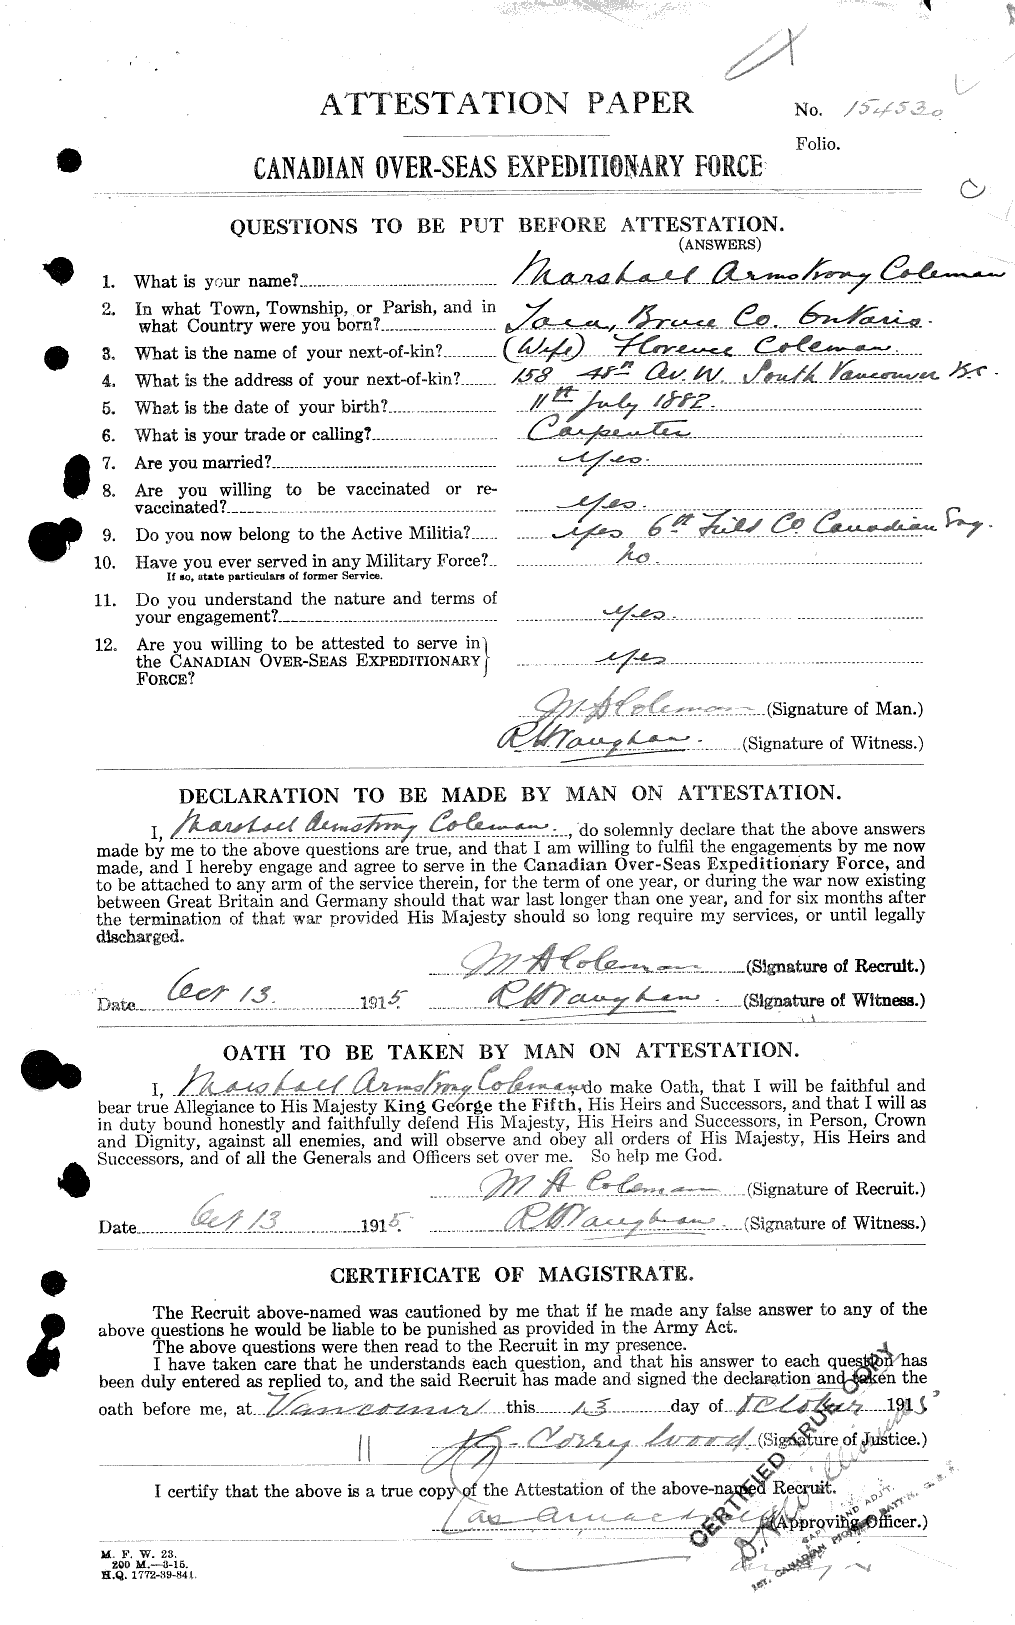 Personnel Records of the First World War - CEF 028237a